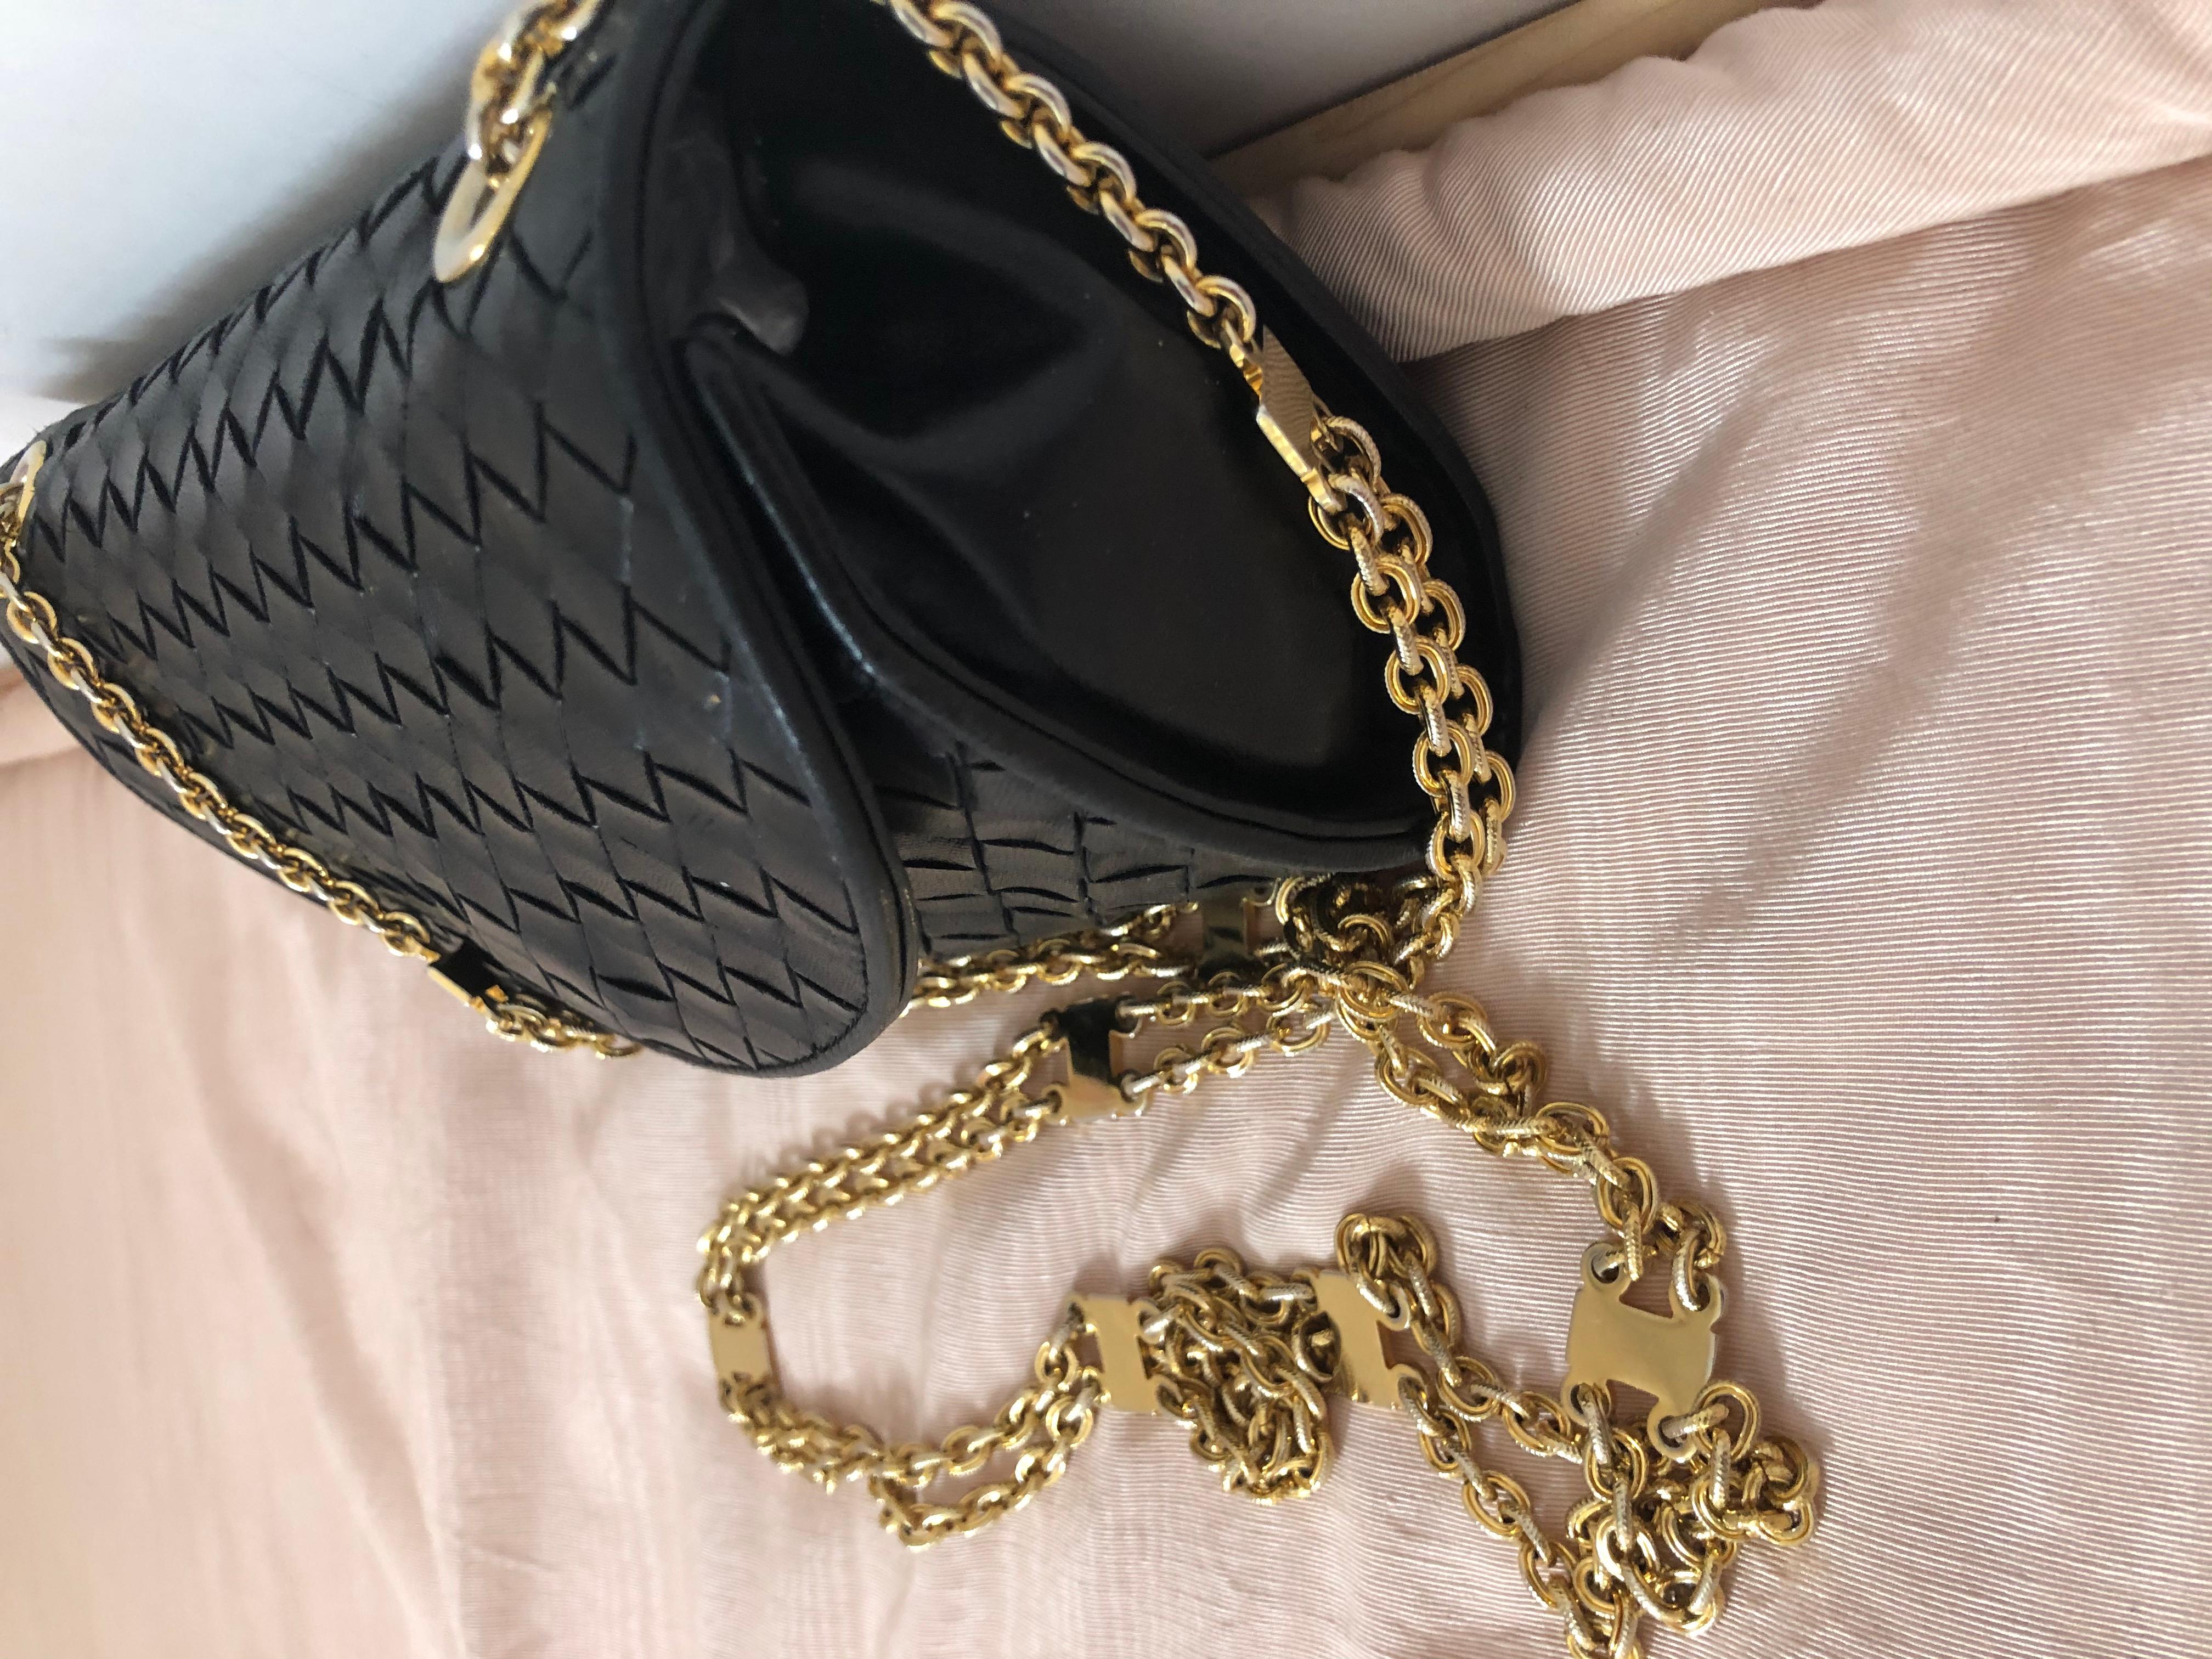 This beautifully crafted handbag will take you from morning to night, no need to change your purse. It is in excellent condition except for the lining (as pictured) which has started peeling in places. The leather is supple, the gold tone chain is